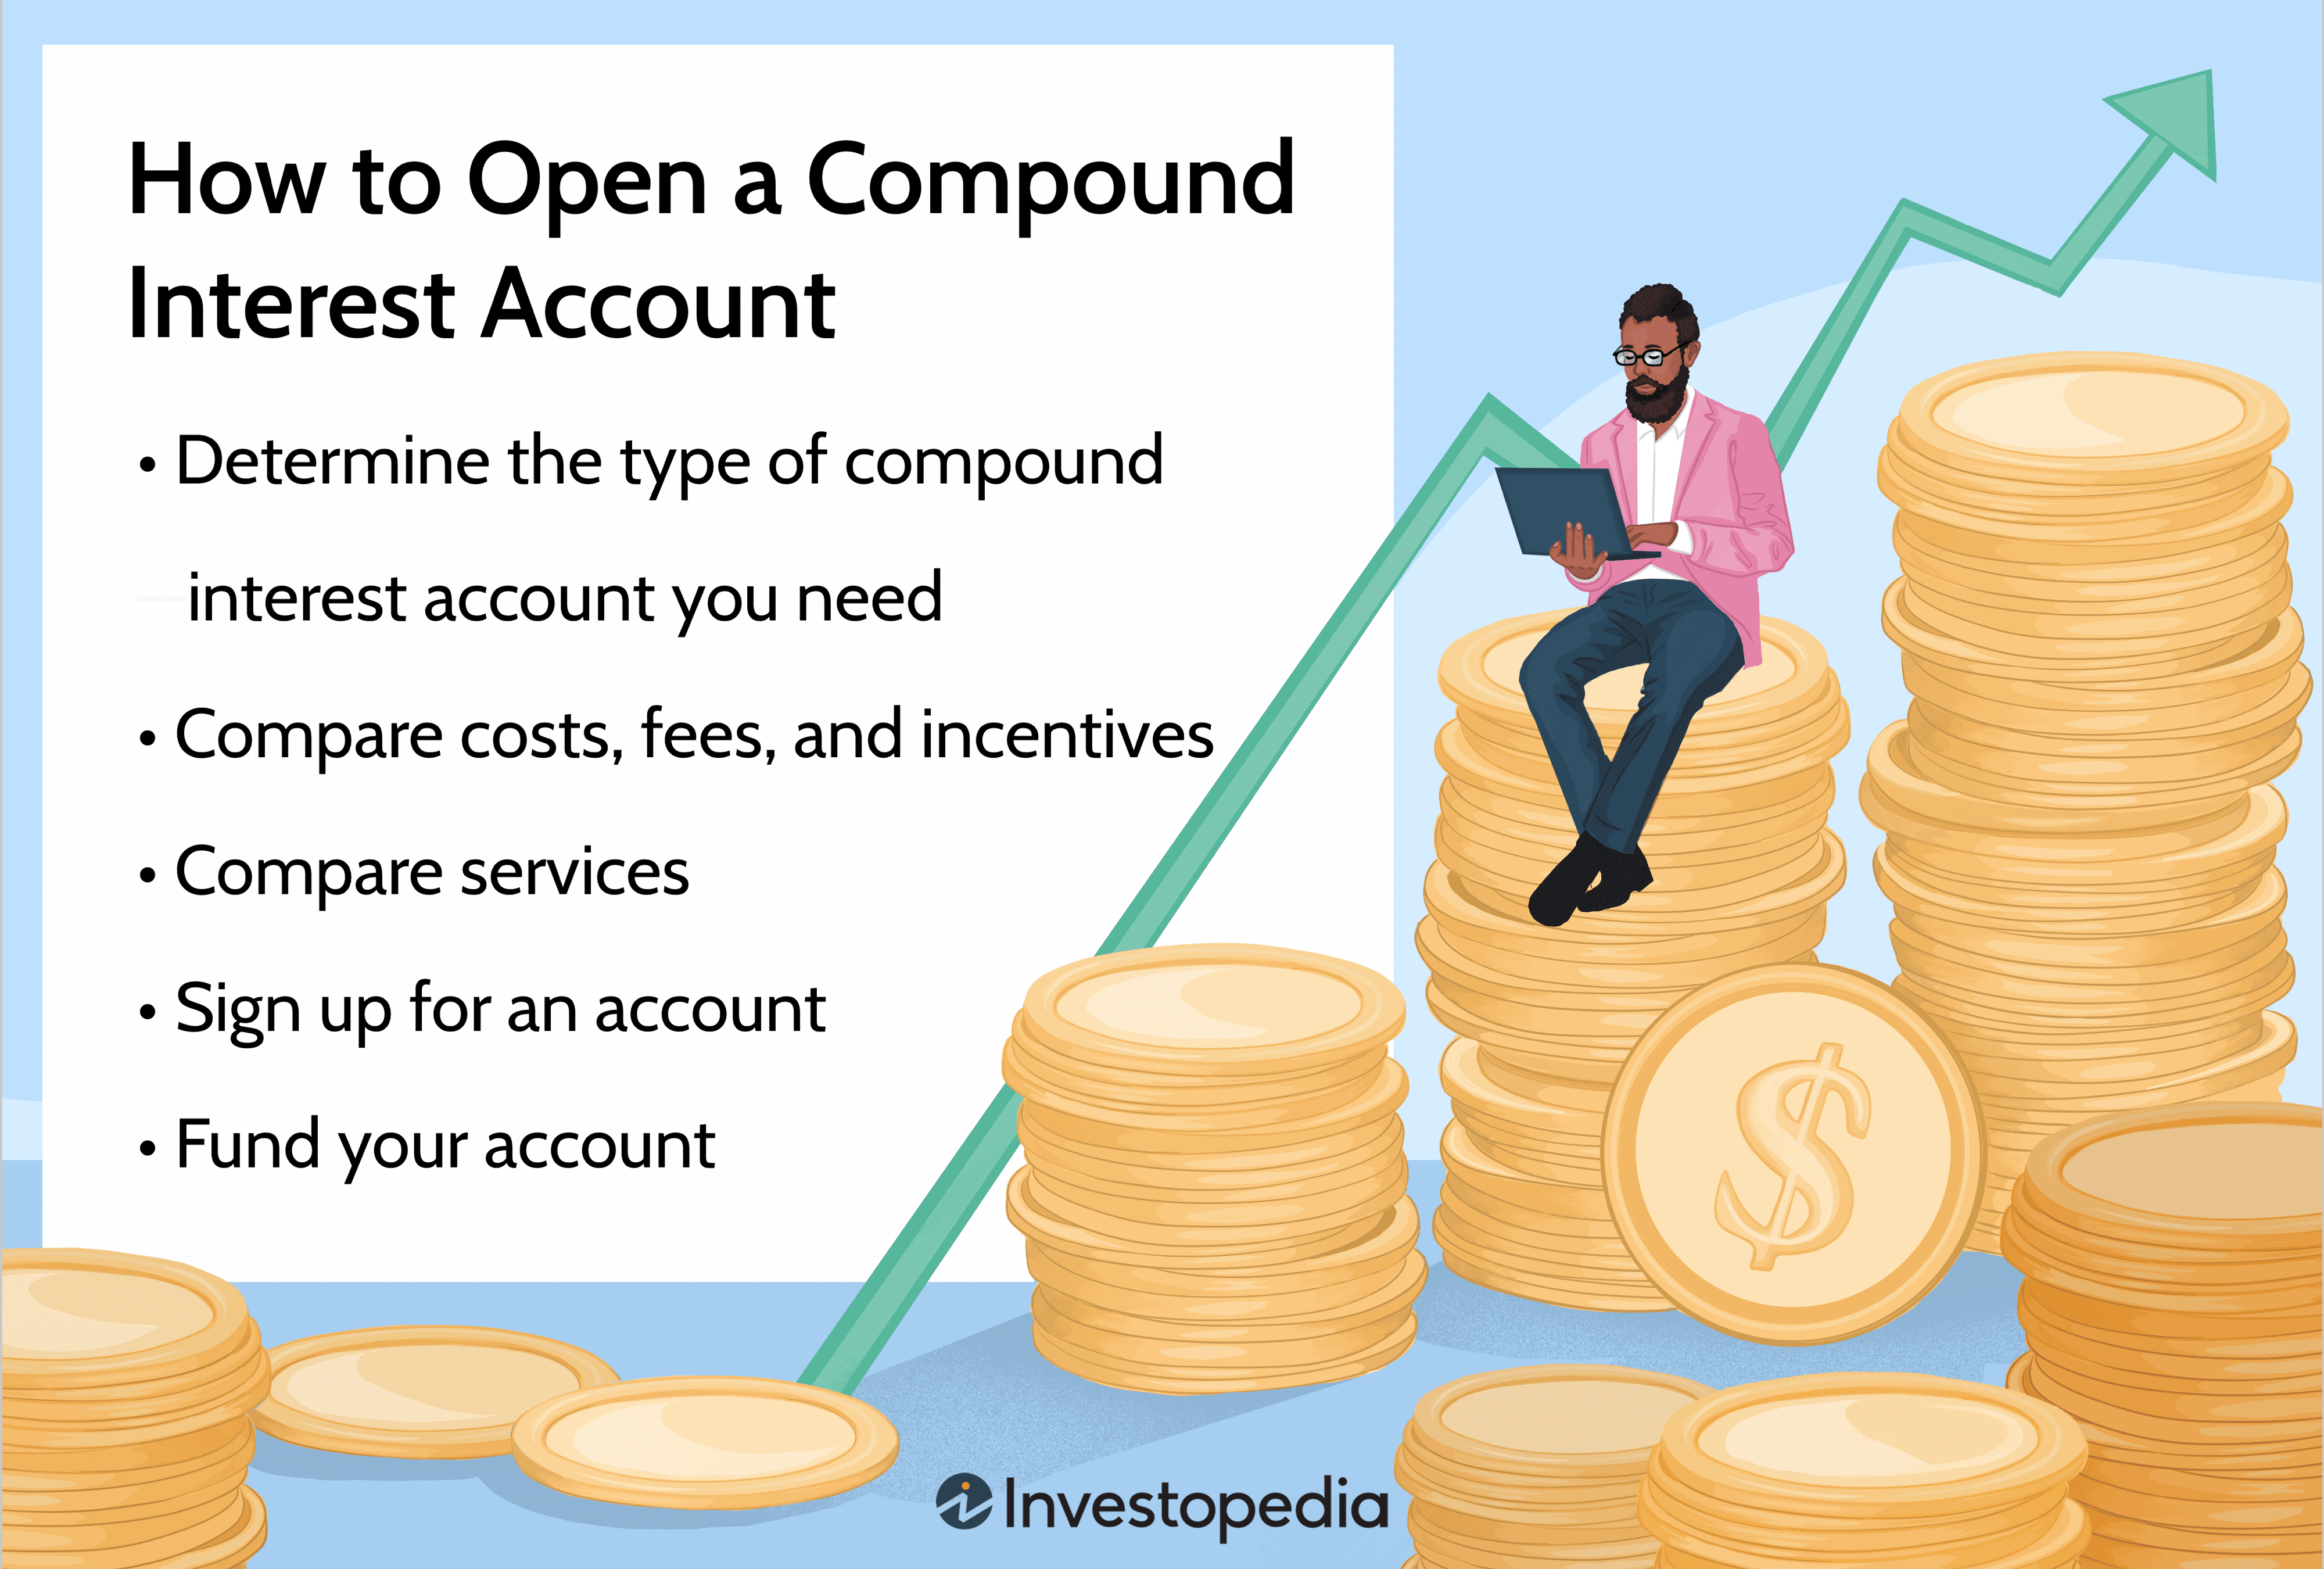 How to Open a Compound Interest Account